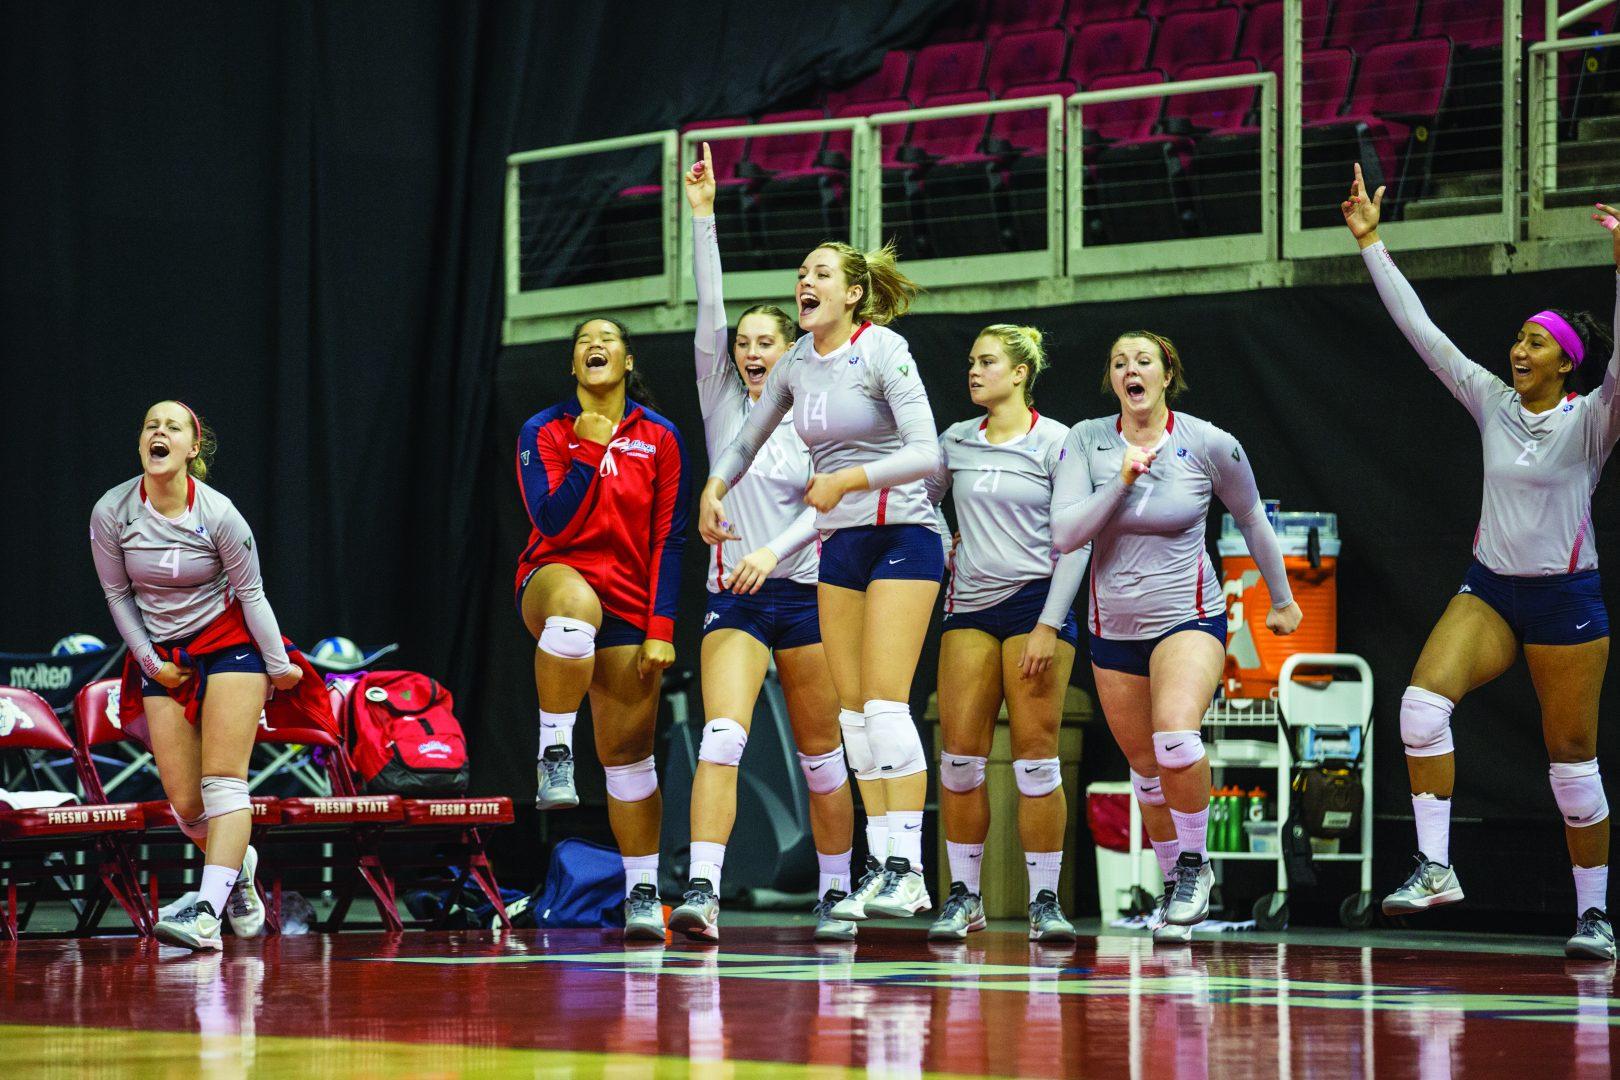 The+Fresno+State+volleyball+team+celebrates+getting+their+first+conference+win+of+the+season+defeating+New+Mexico+3-0+on+Saturday+afternoon+at+the+Save+Mart+Center.+%28Khone+Saysamongdy%2FThe+Collegian%29